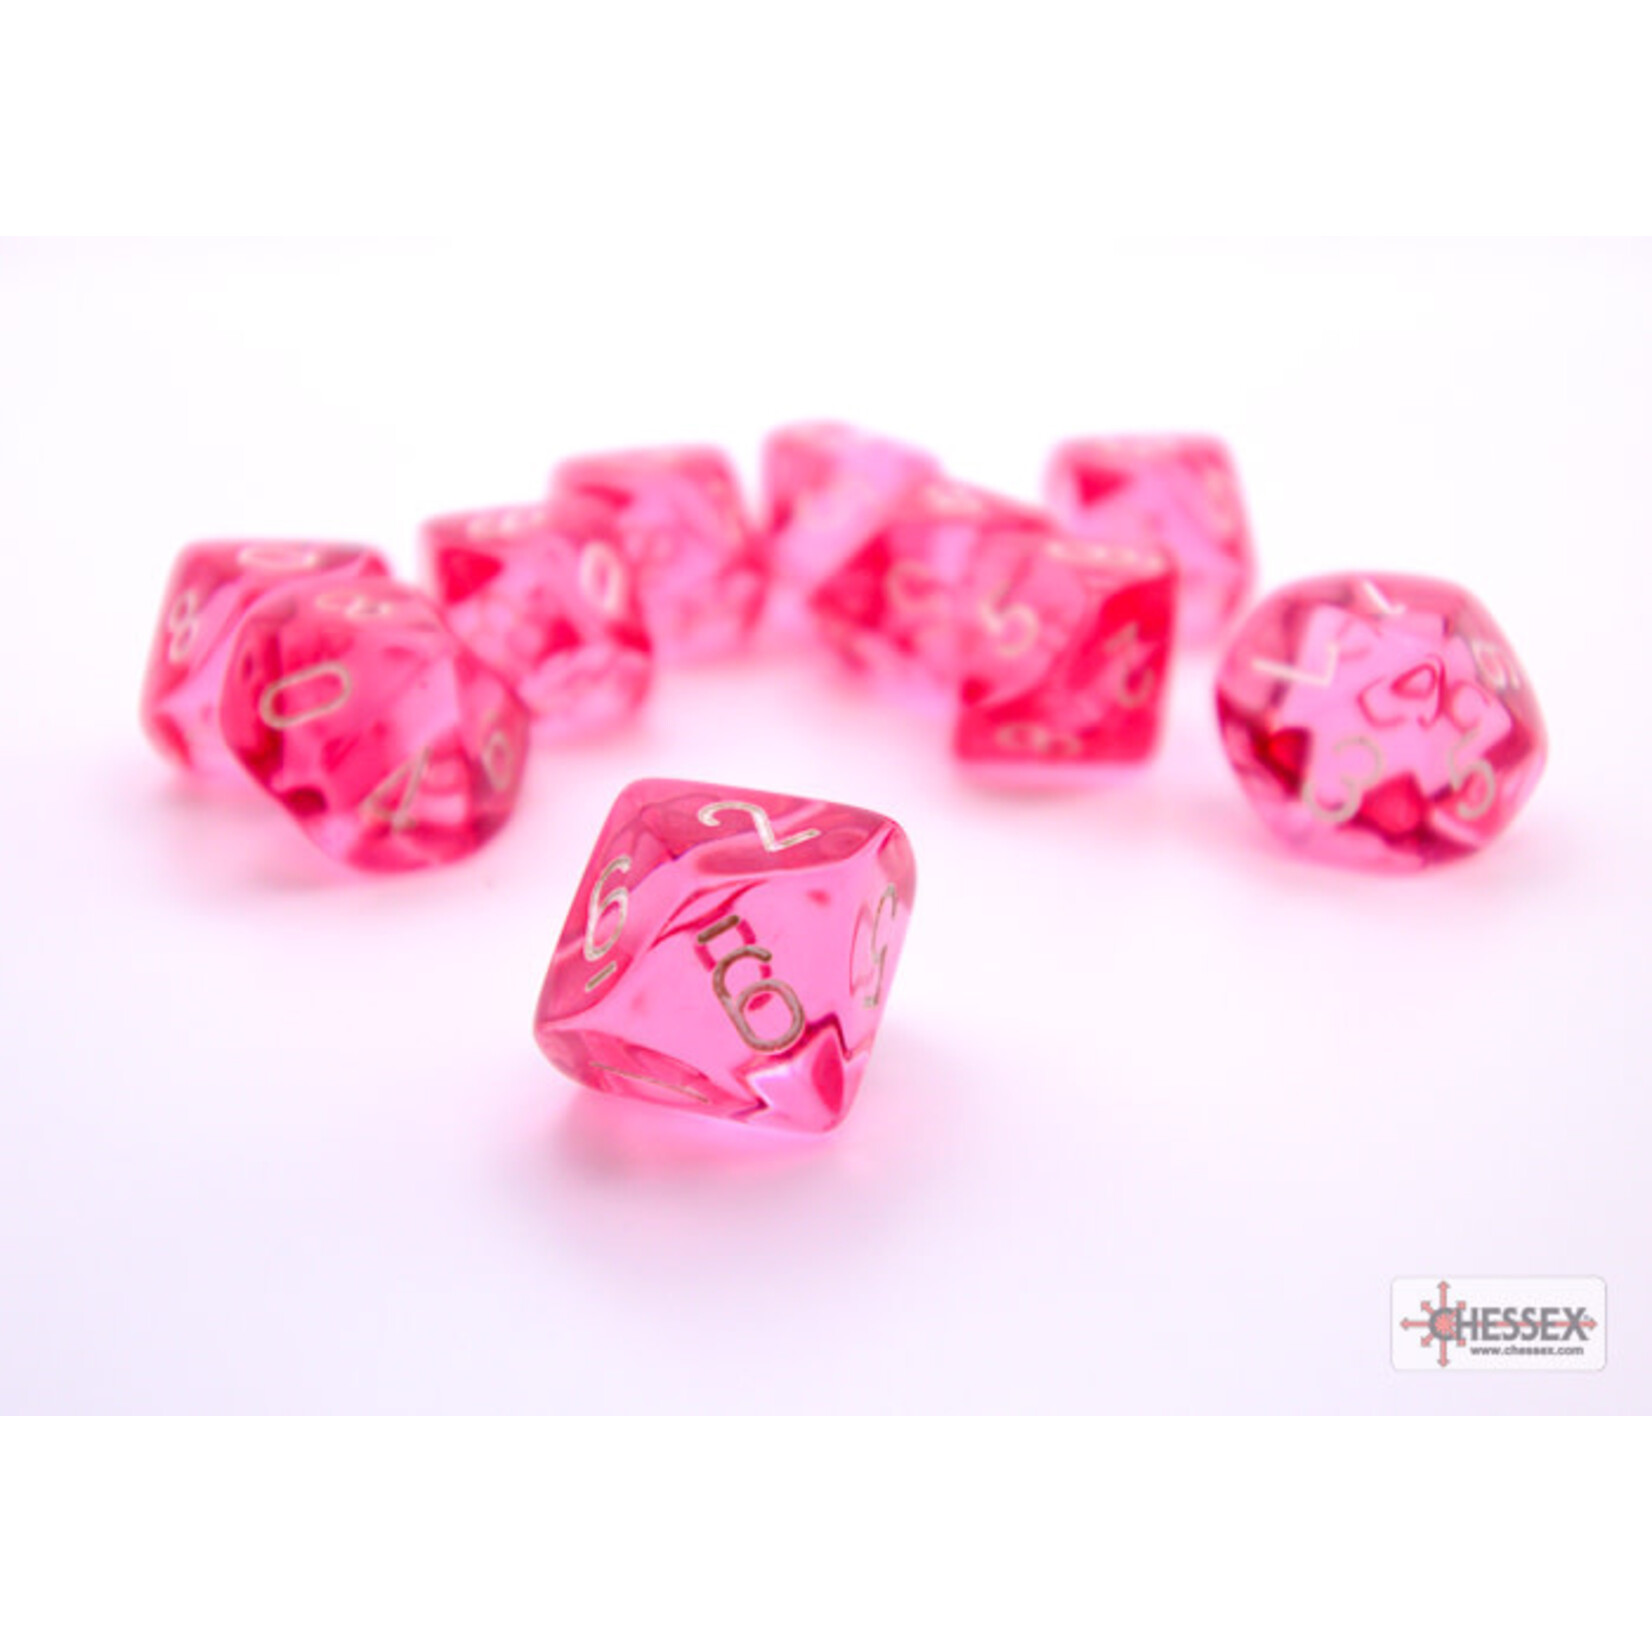 Chessex Chessex D10 Translucent Pink with White (10) Set